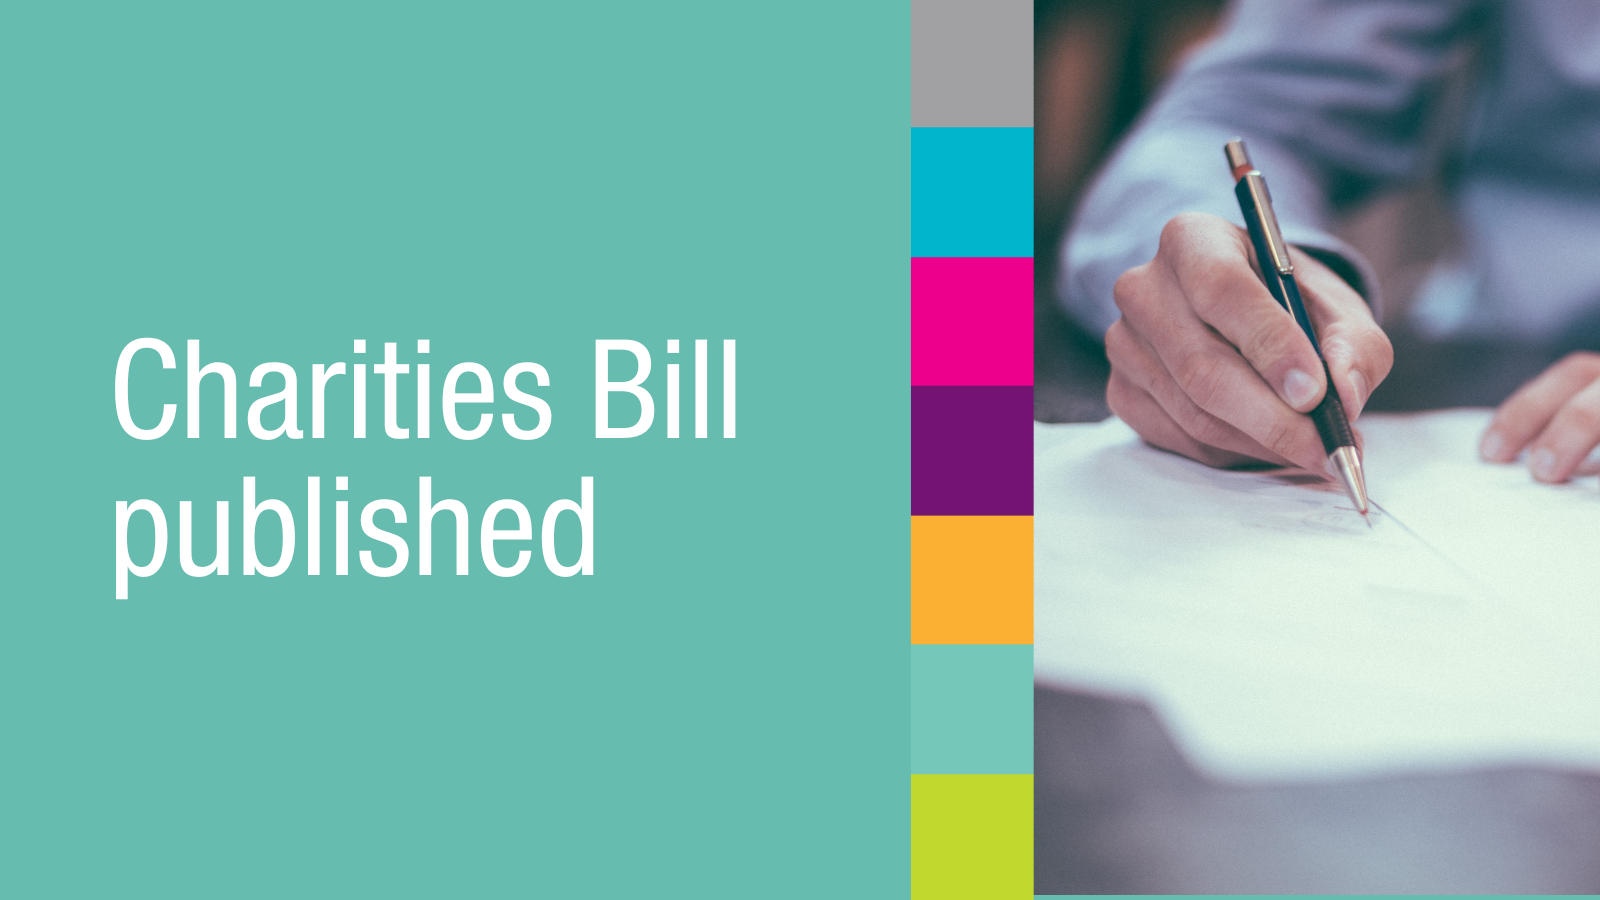 OSCR welcomes publication of new Charities Bill